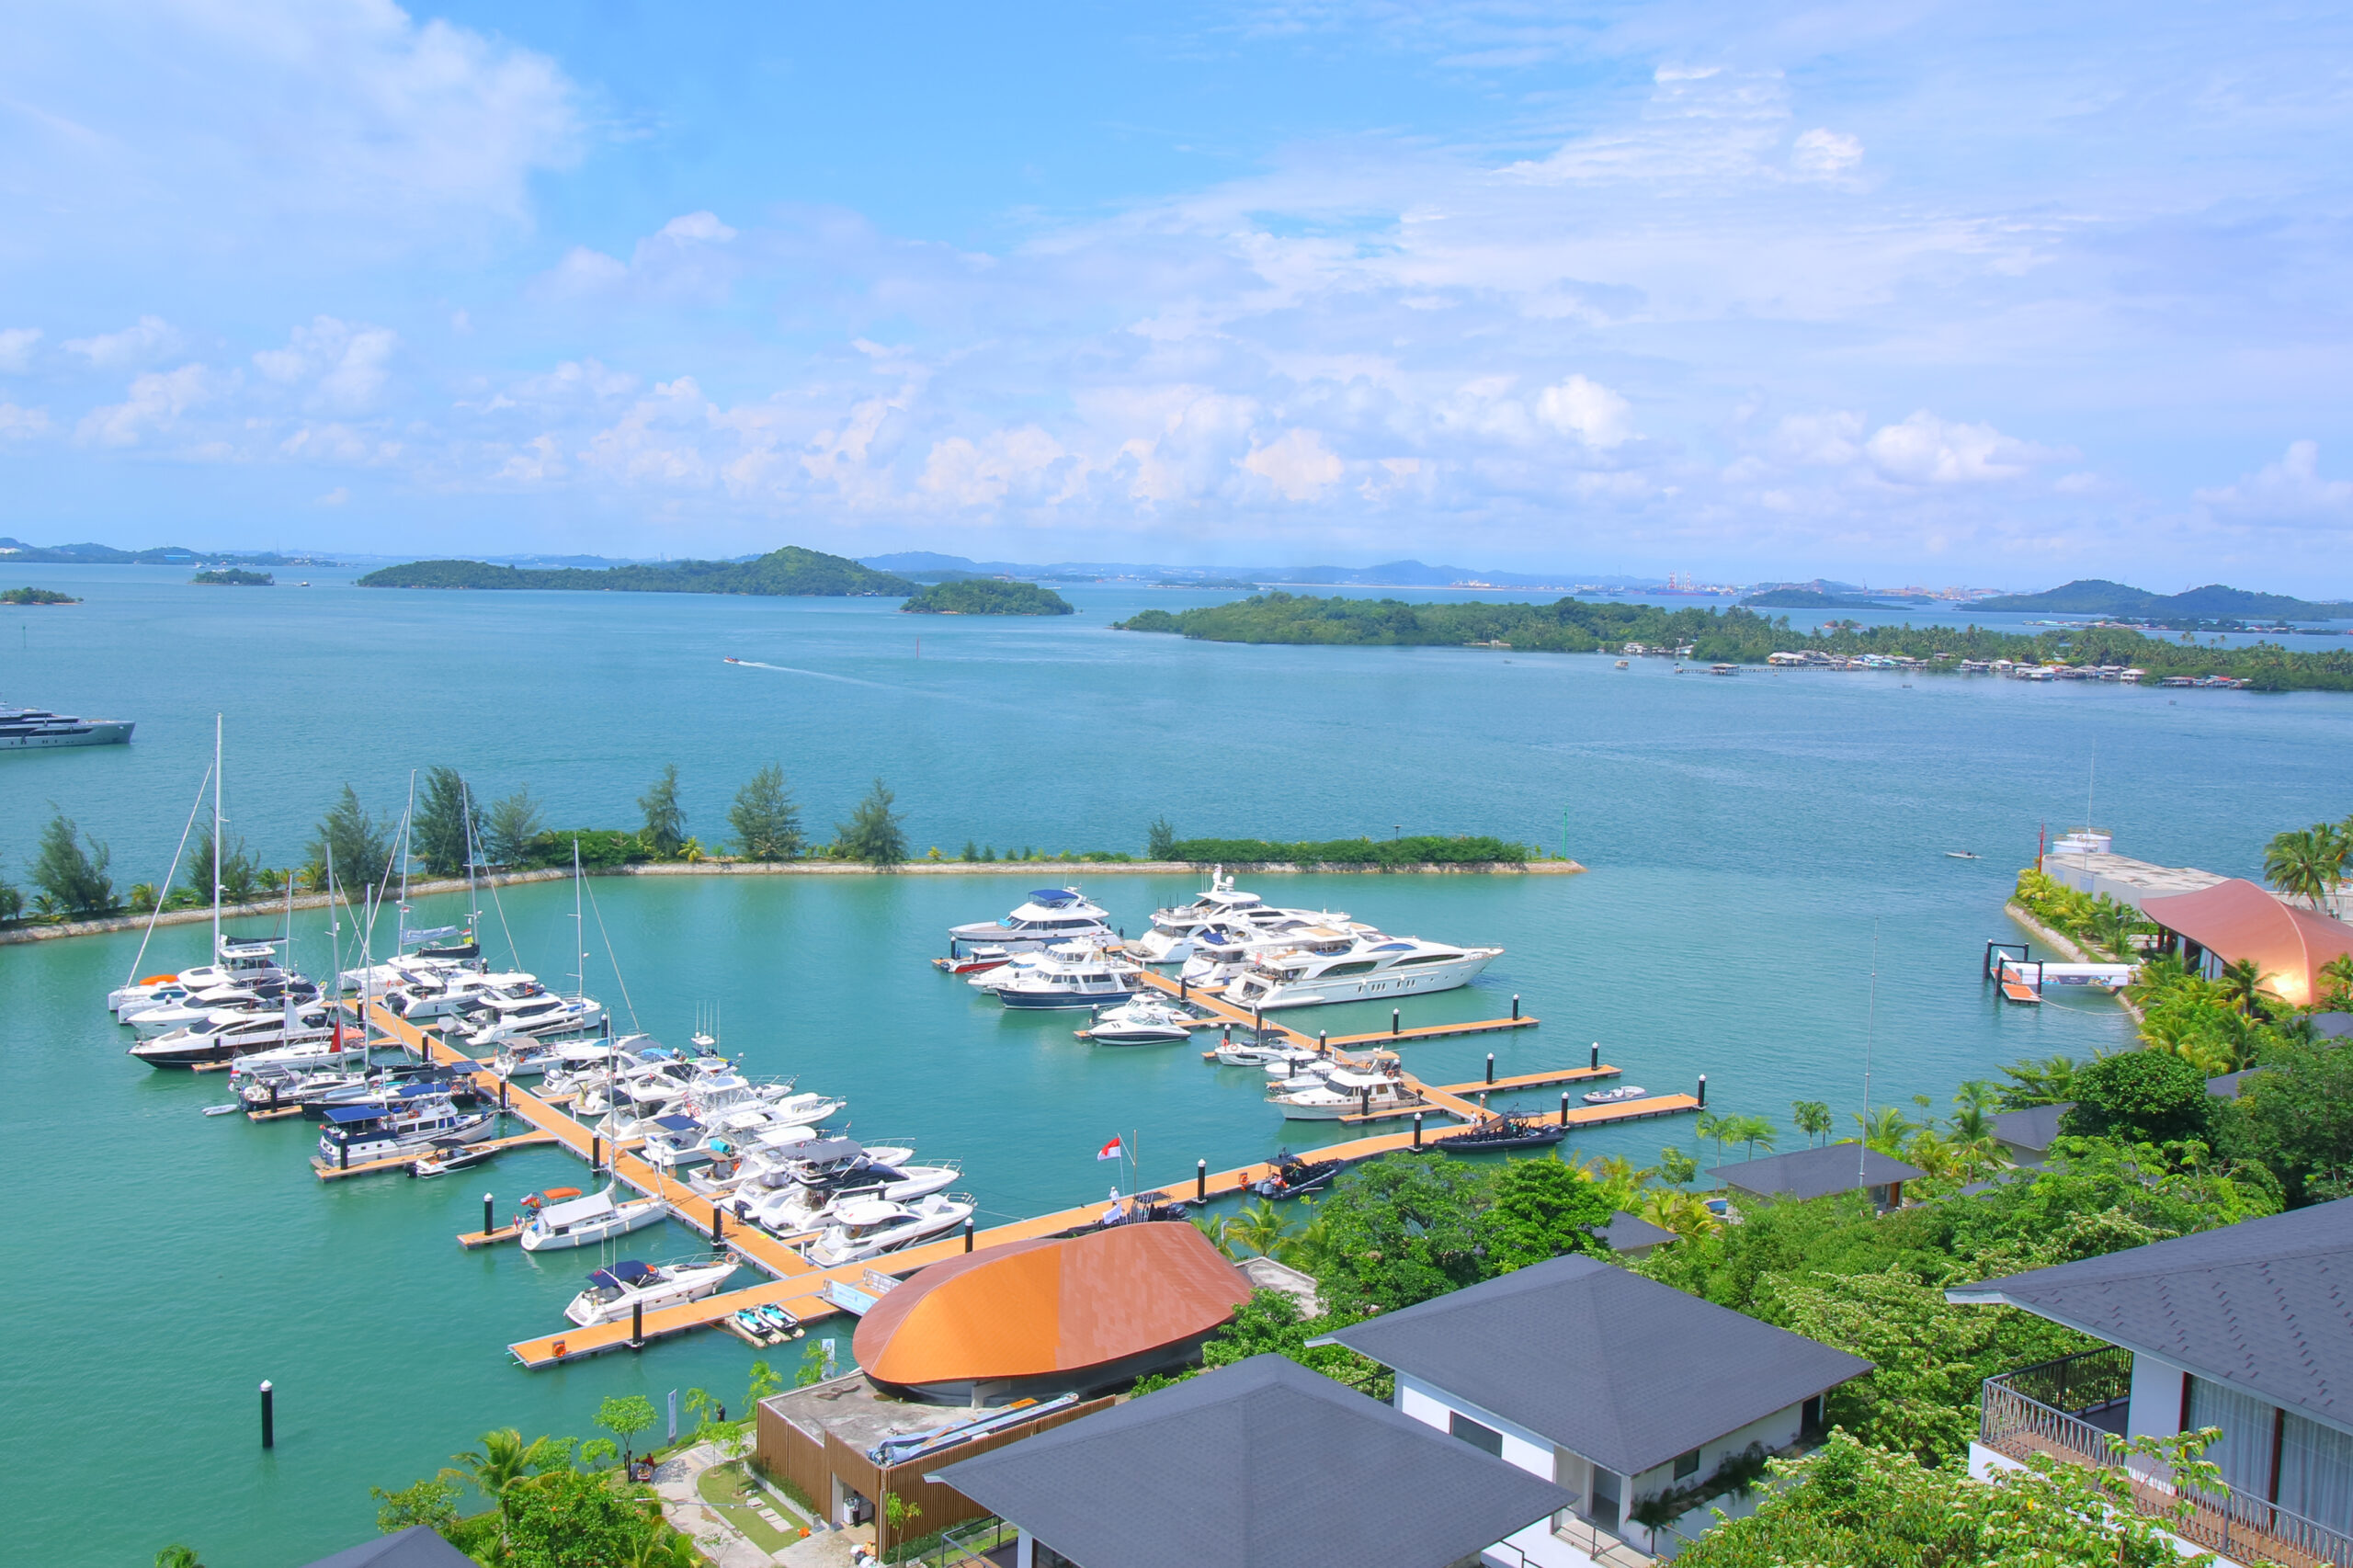 ONE°15 Marina Nirup Island “We’ve been really pleased with the onboarding process as it has made things incredibly easy for our team. We have big plans for our marina here and Pacsoft is the right platform to make them into reality.” Jonathan Sit – General Manager